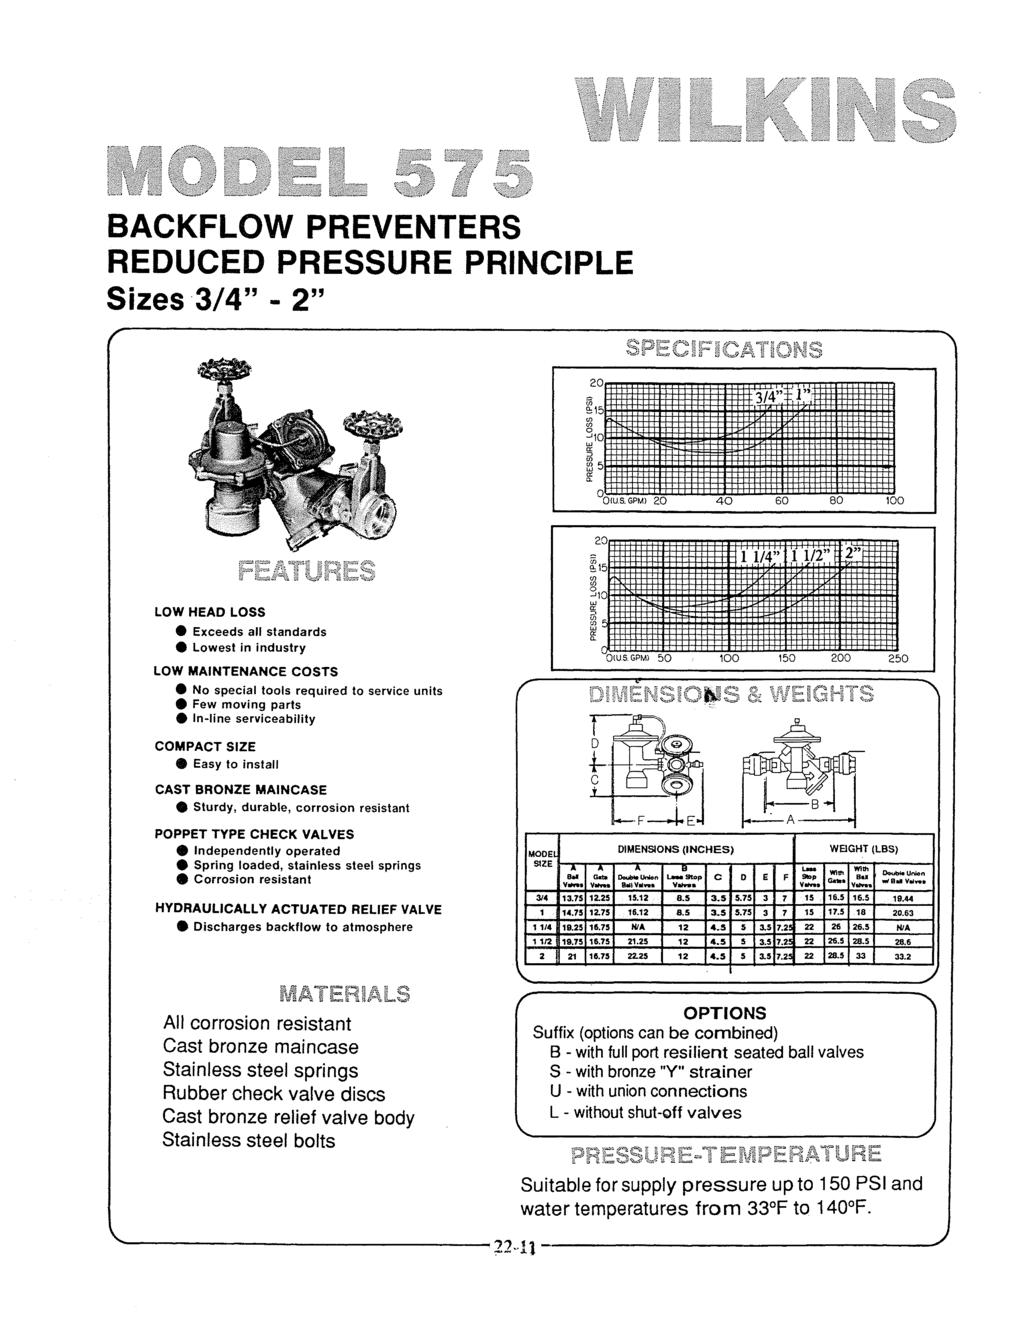 BACKFLOW PREVENTERS REDUCED PRESSURE PRINCIPLE Sizes 3/4-2" LOW HEAD LOSS Exceeds all standards Lowest in industry LOW MAINTENANCE COSTS No special tools required to service units Few moving parts